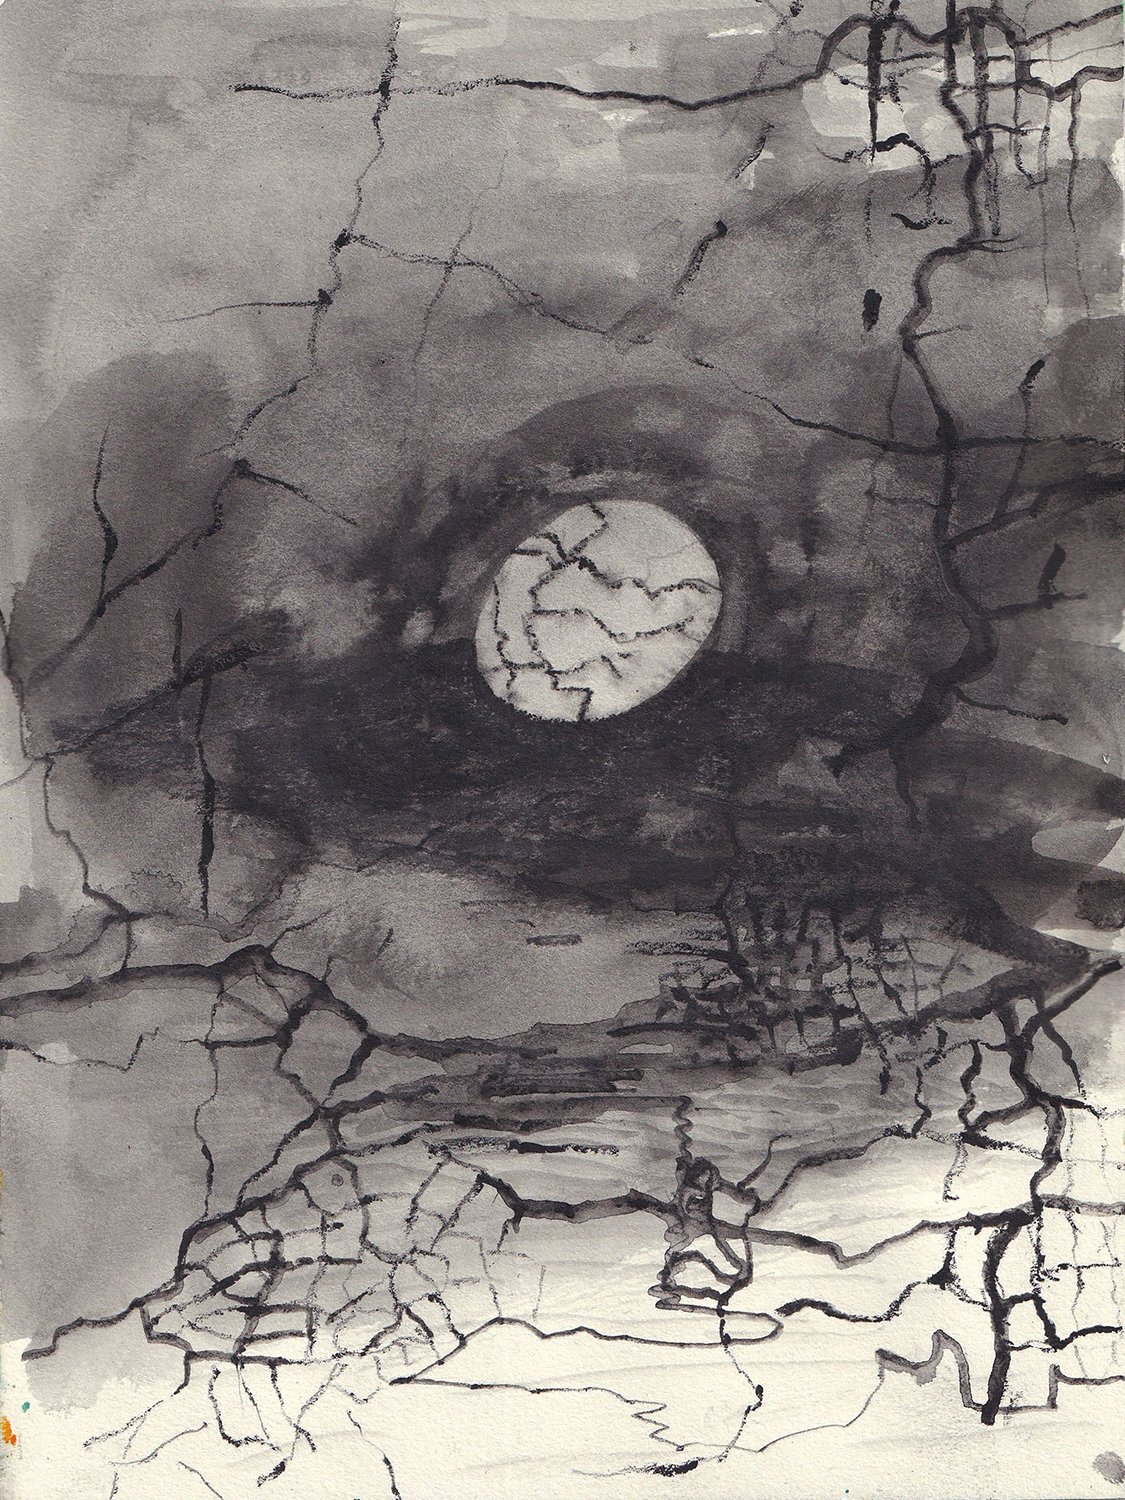 Cracked Shell / 2022, charcoal and graphite on paper, 15 x 20 cm